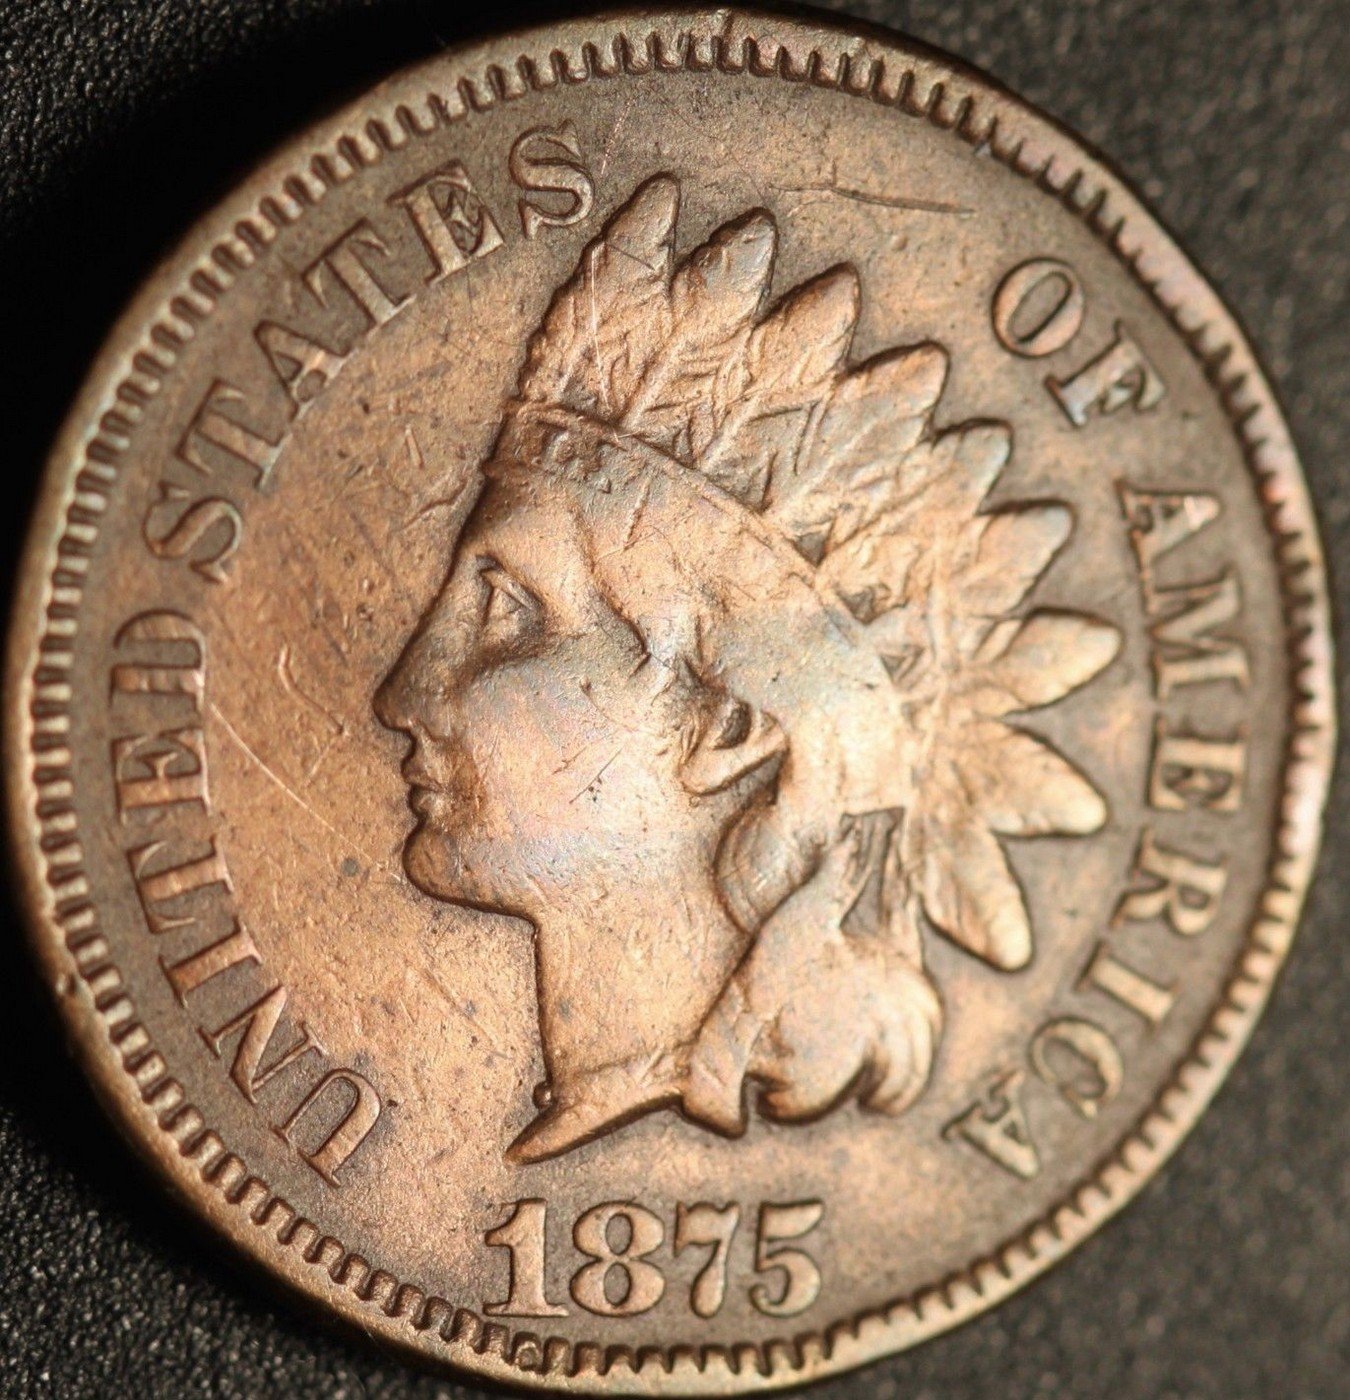 1875 RPD-003 - Indian Head Cent - Photo by Ed Nathanson